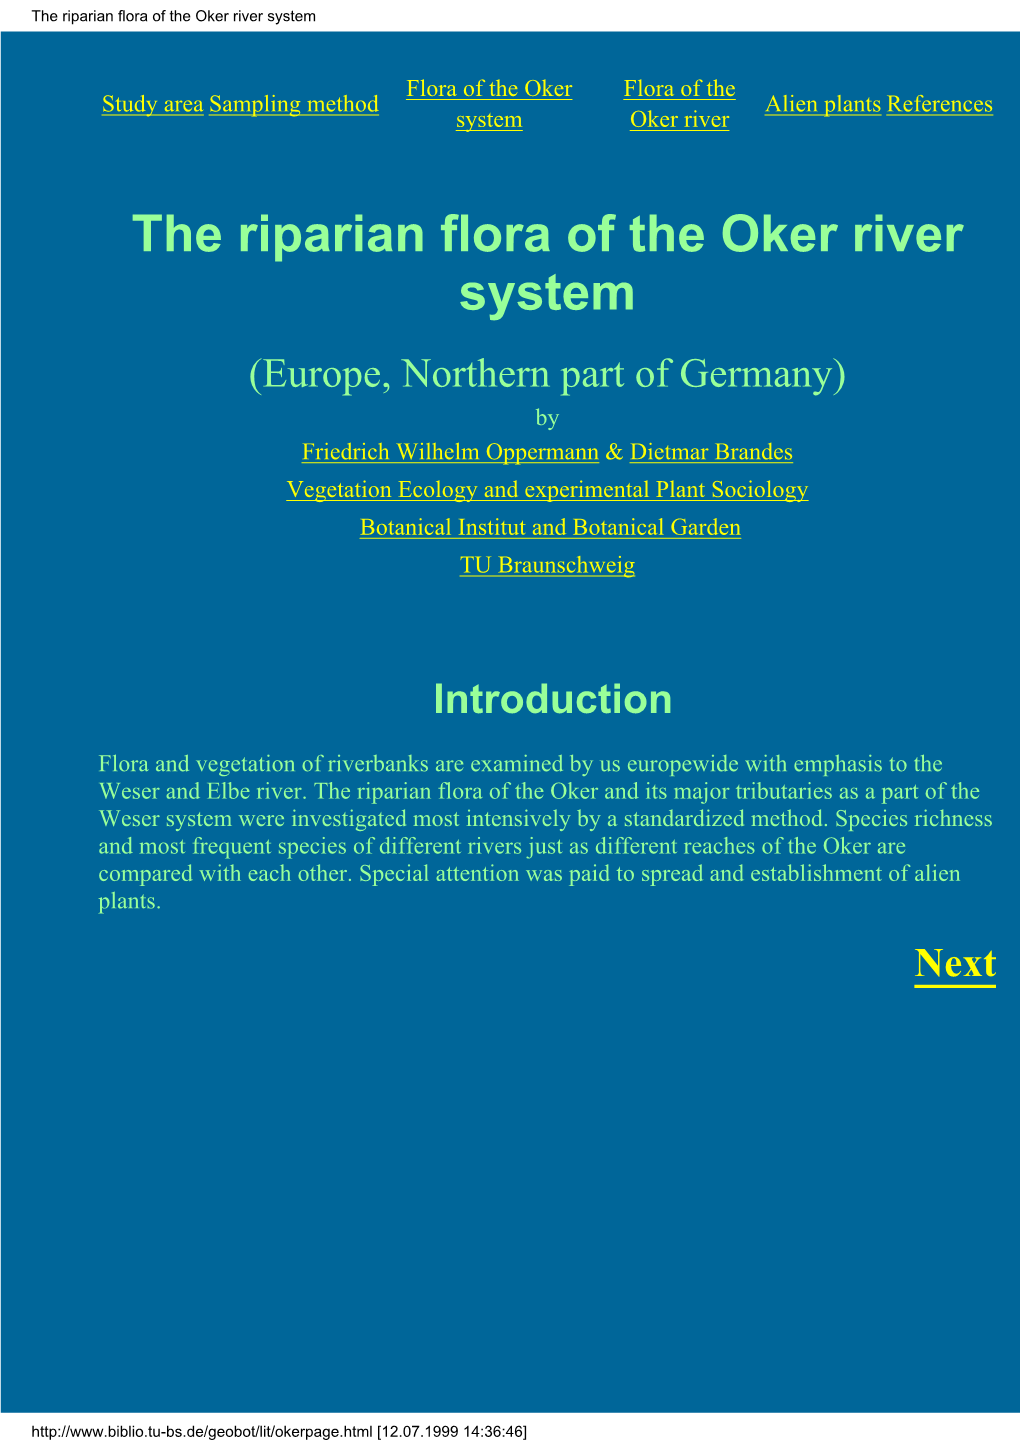 The Riparian Flora of the Oker River System